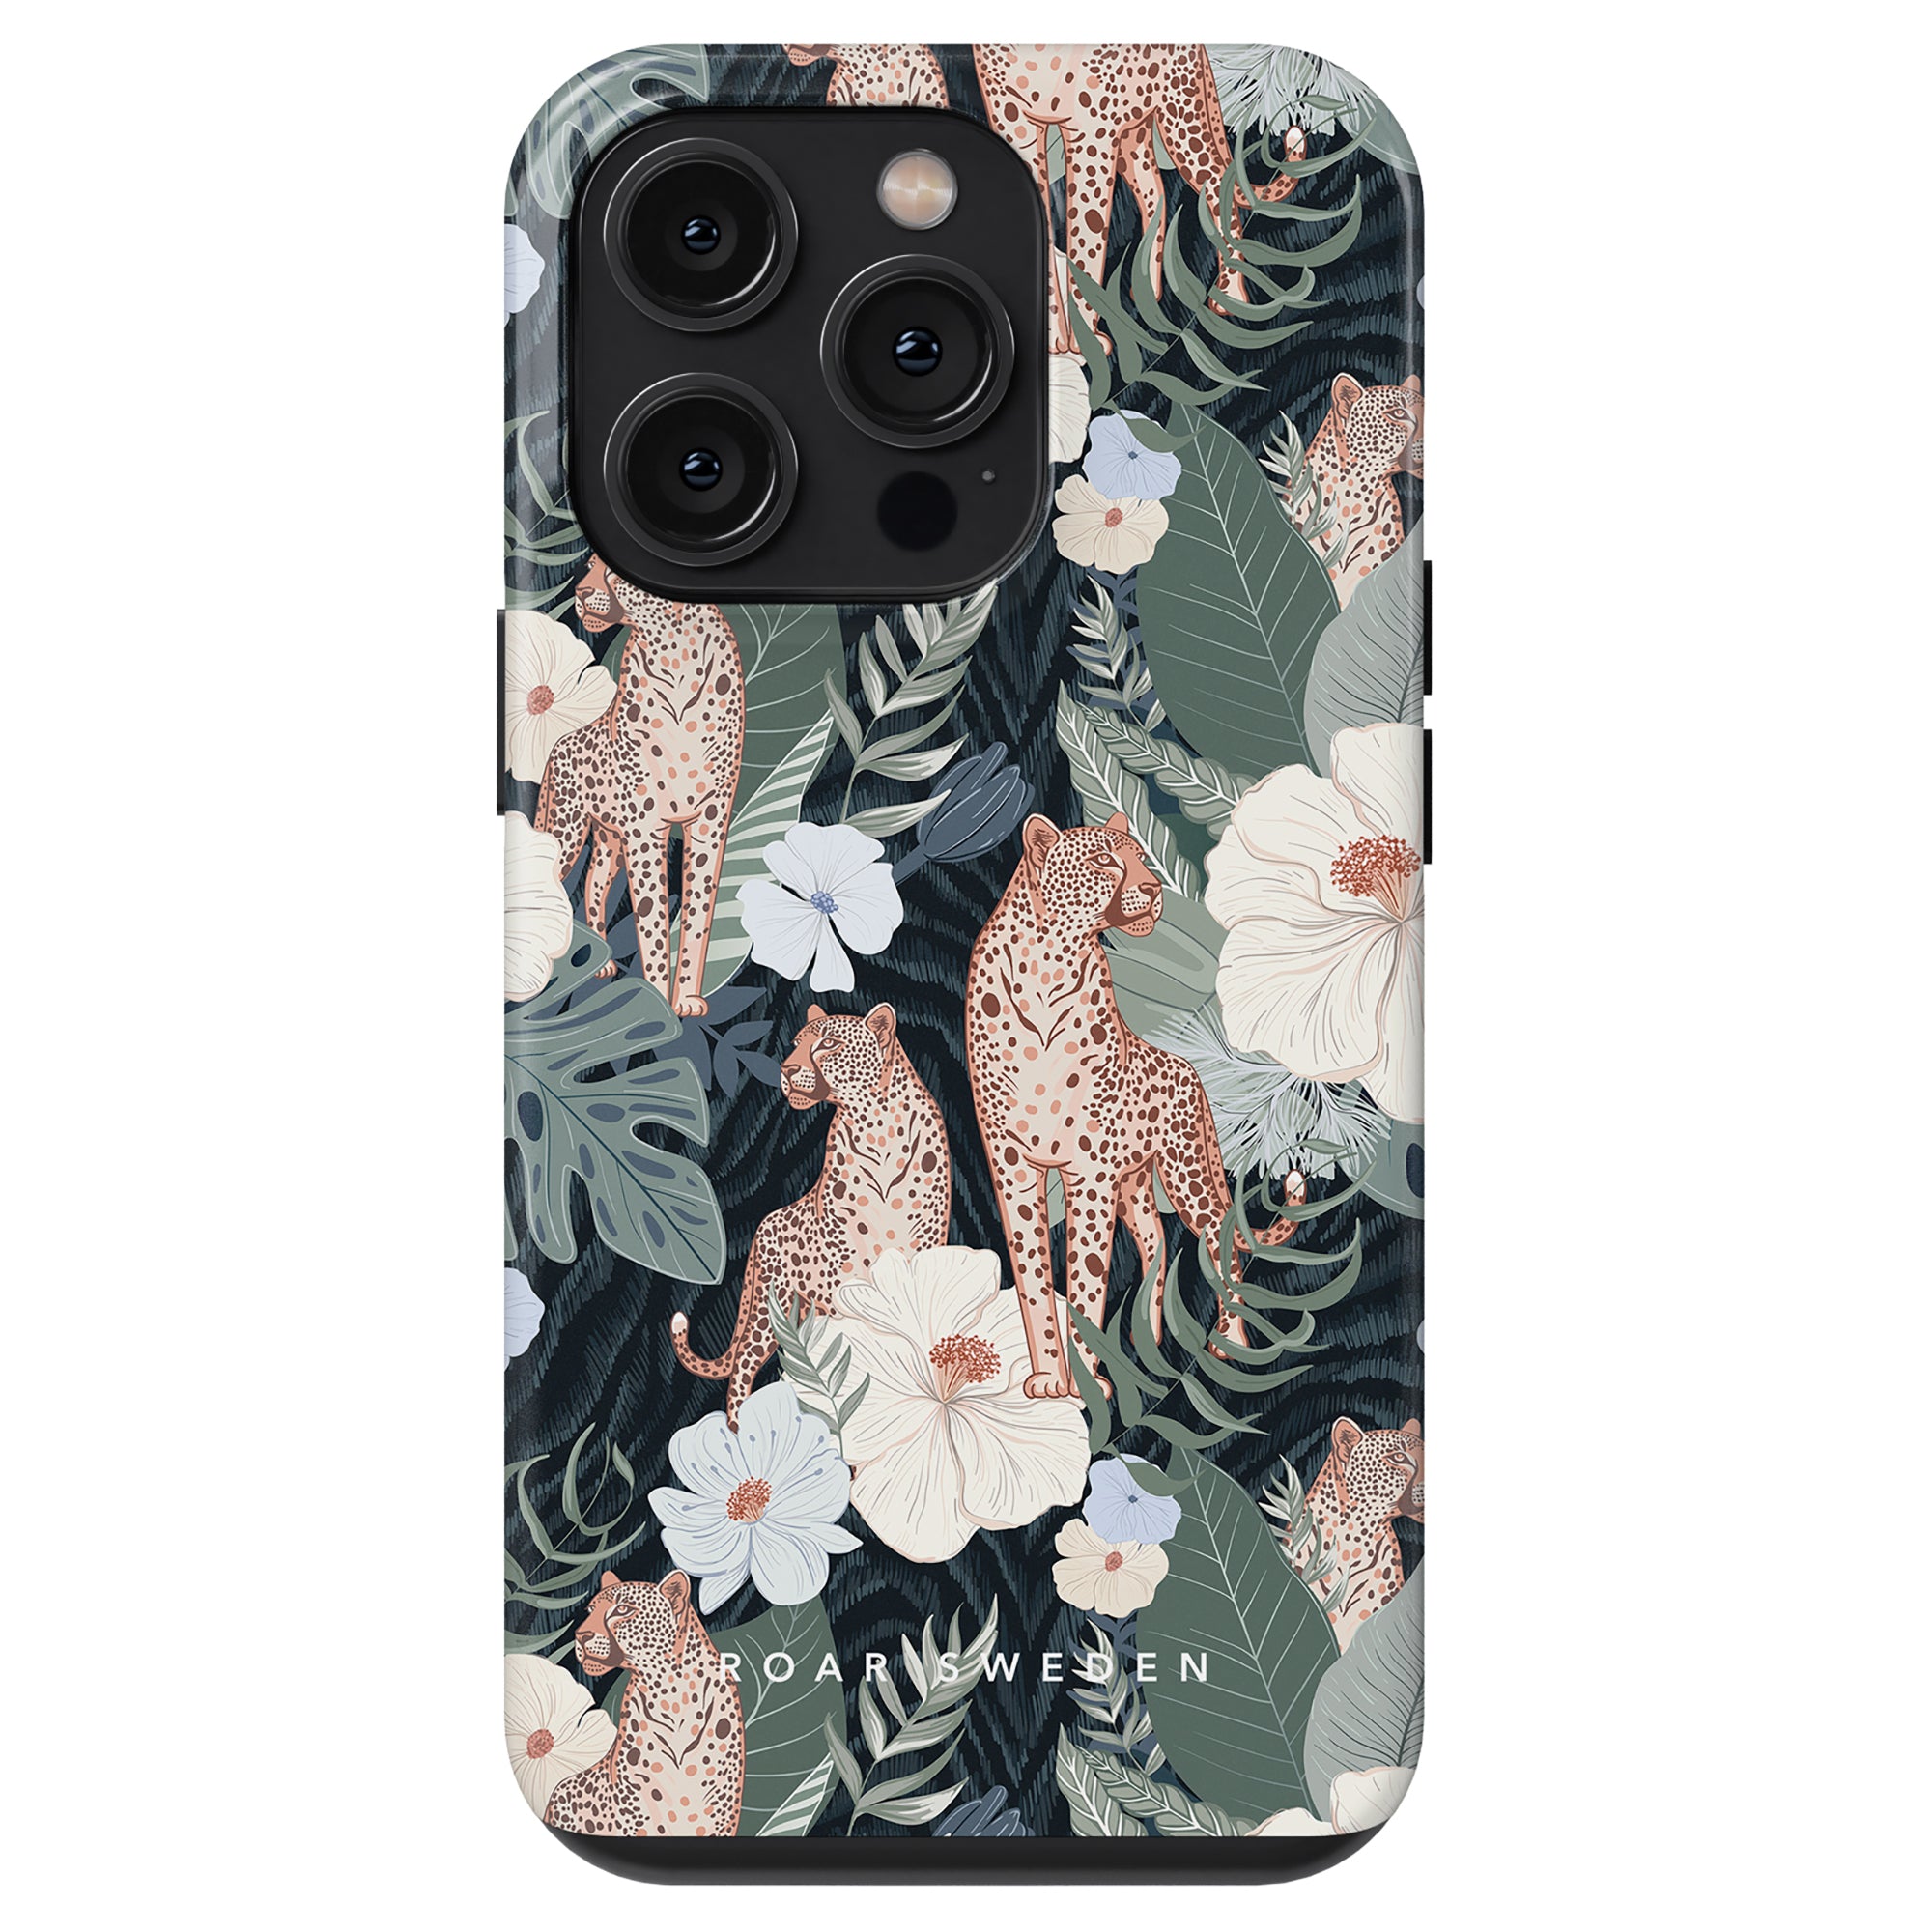 A Leopardess - Tough Case with a jungle-themed design, featuring leopards and floral patterns from our exclusive Leopard Collection.